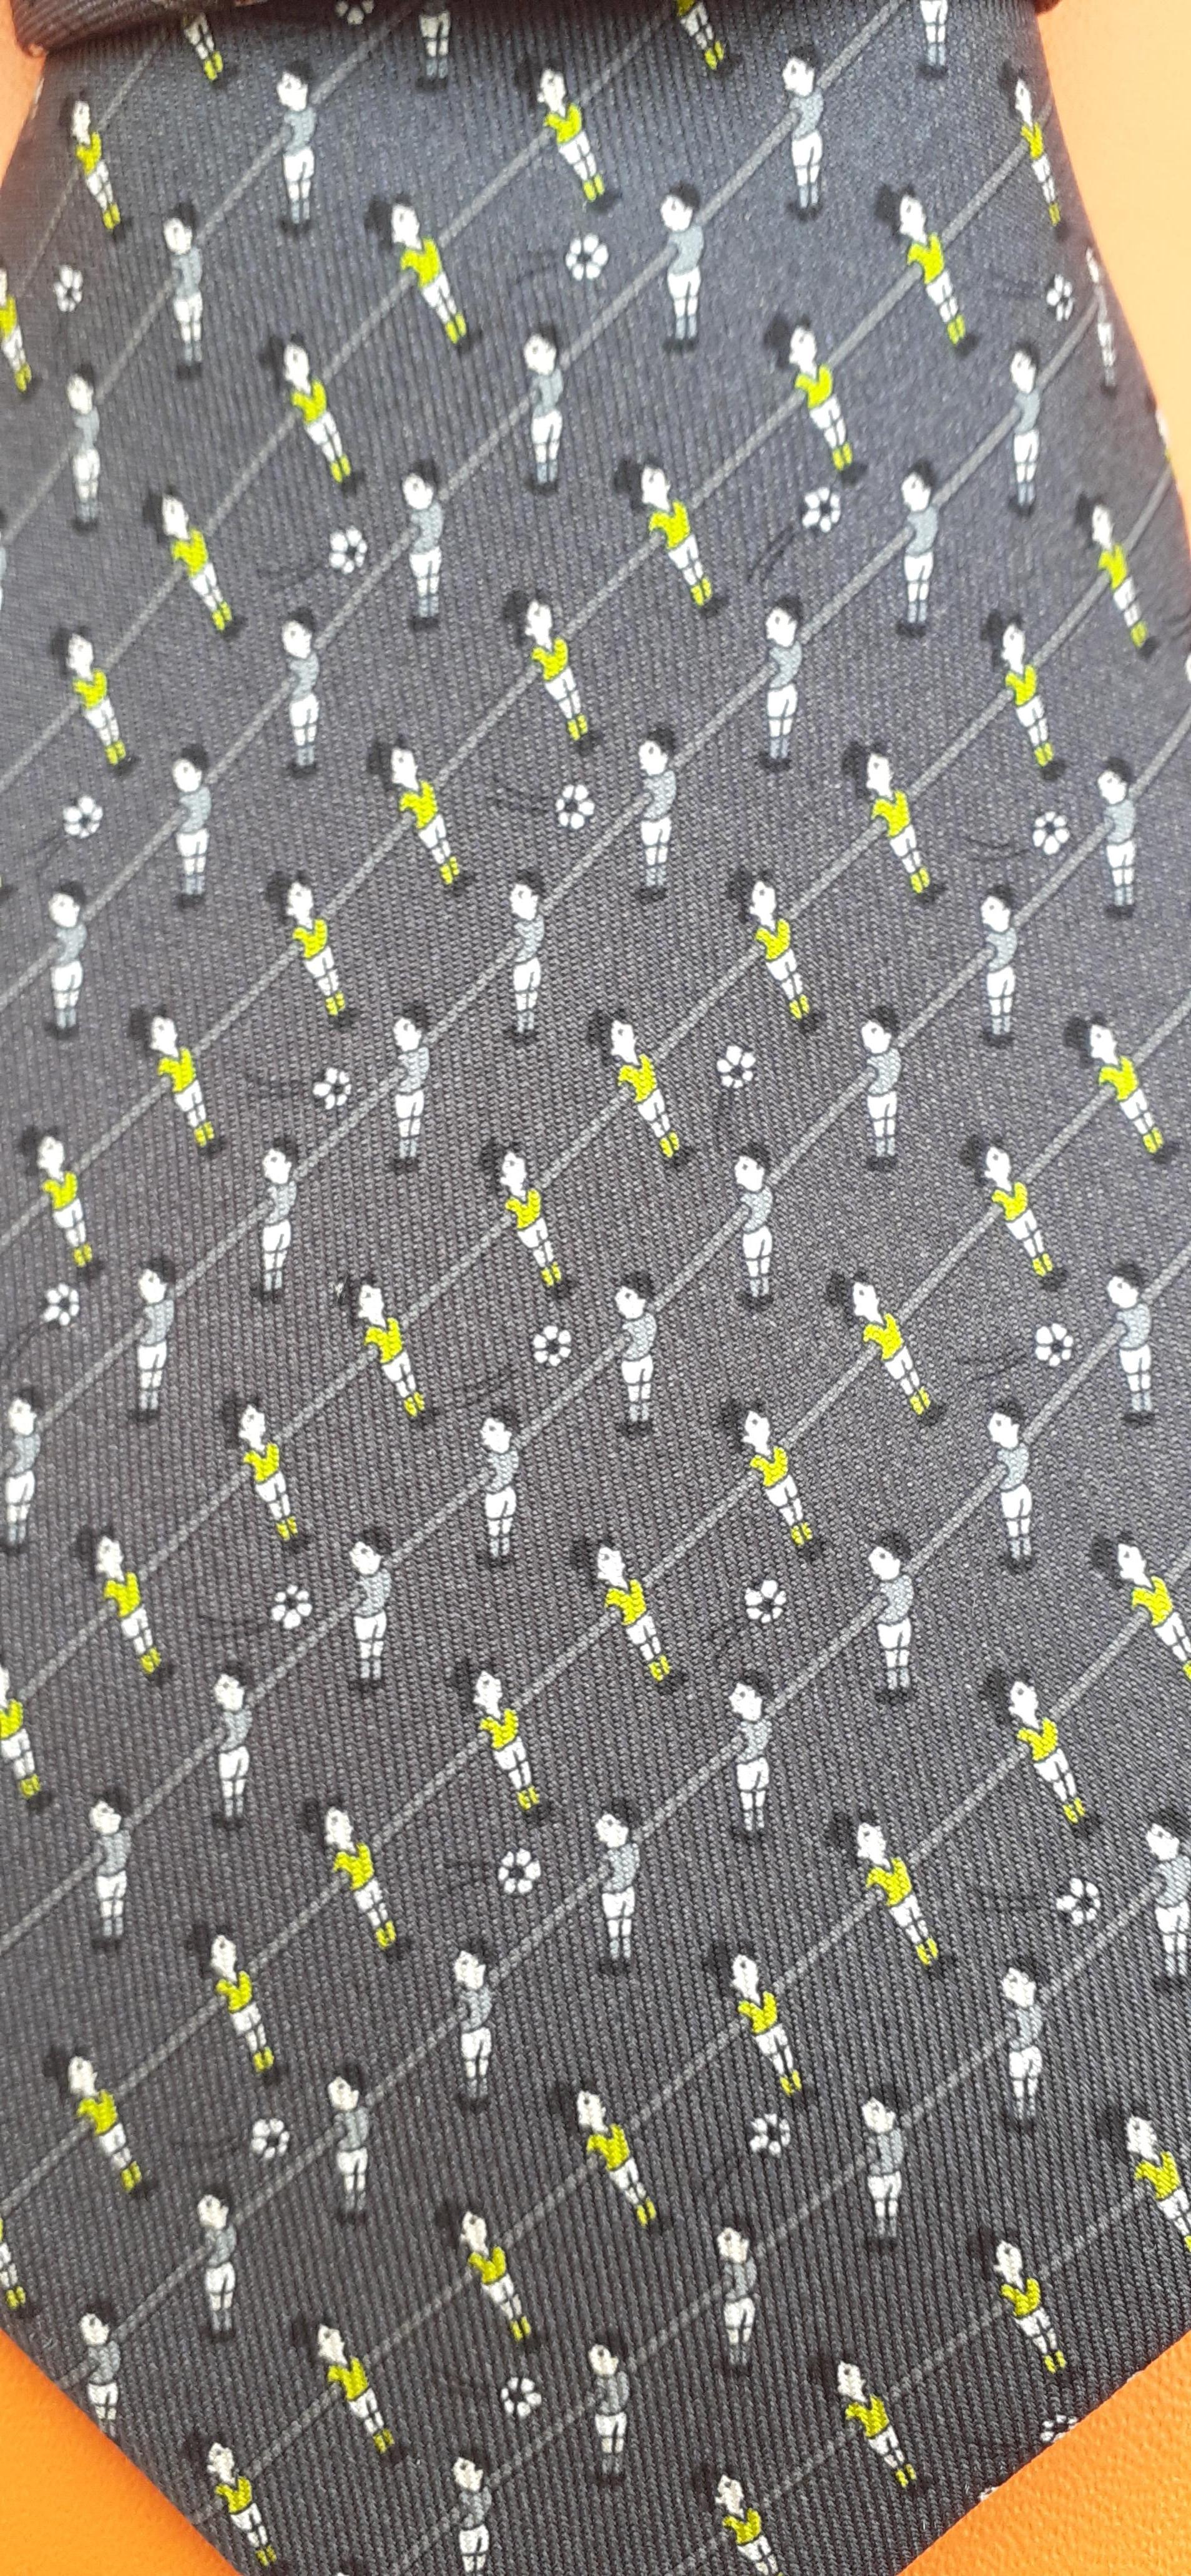 Cute and Rare Authentic Hermès Tie

Print: Baby Foot Players, Table Soccer

A goal and a small ball are hidden in the lining on the back

Made in France

Made of 100% Silk

Colorways: Dark Grey / White / Neon Green

Please note: Players' t-shirts